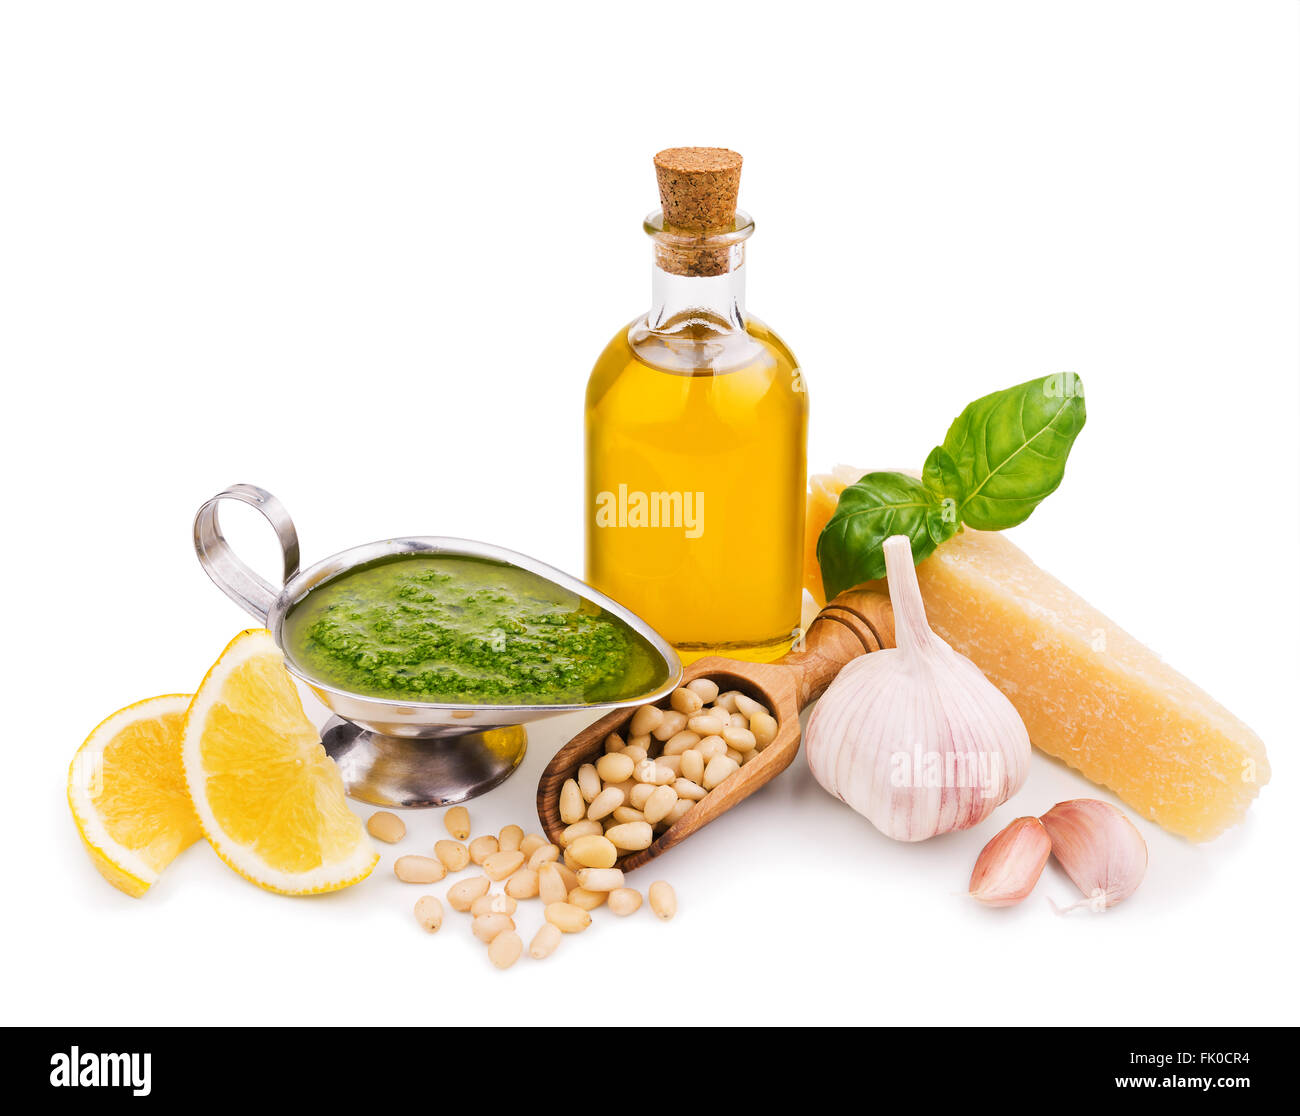 pesto sauce and its ingredients isolated on white background Stock Photo